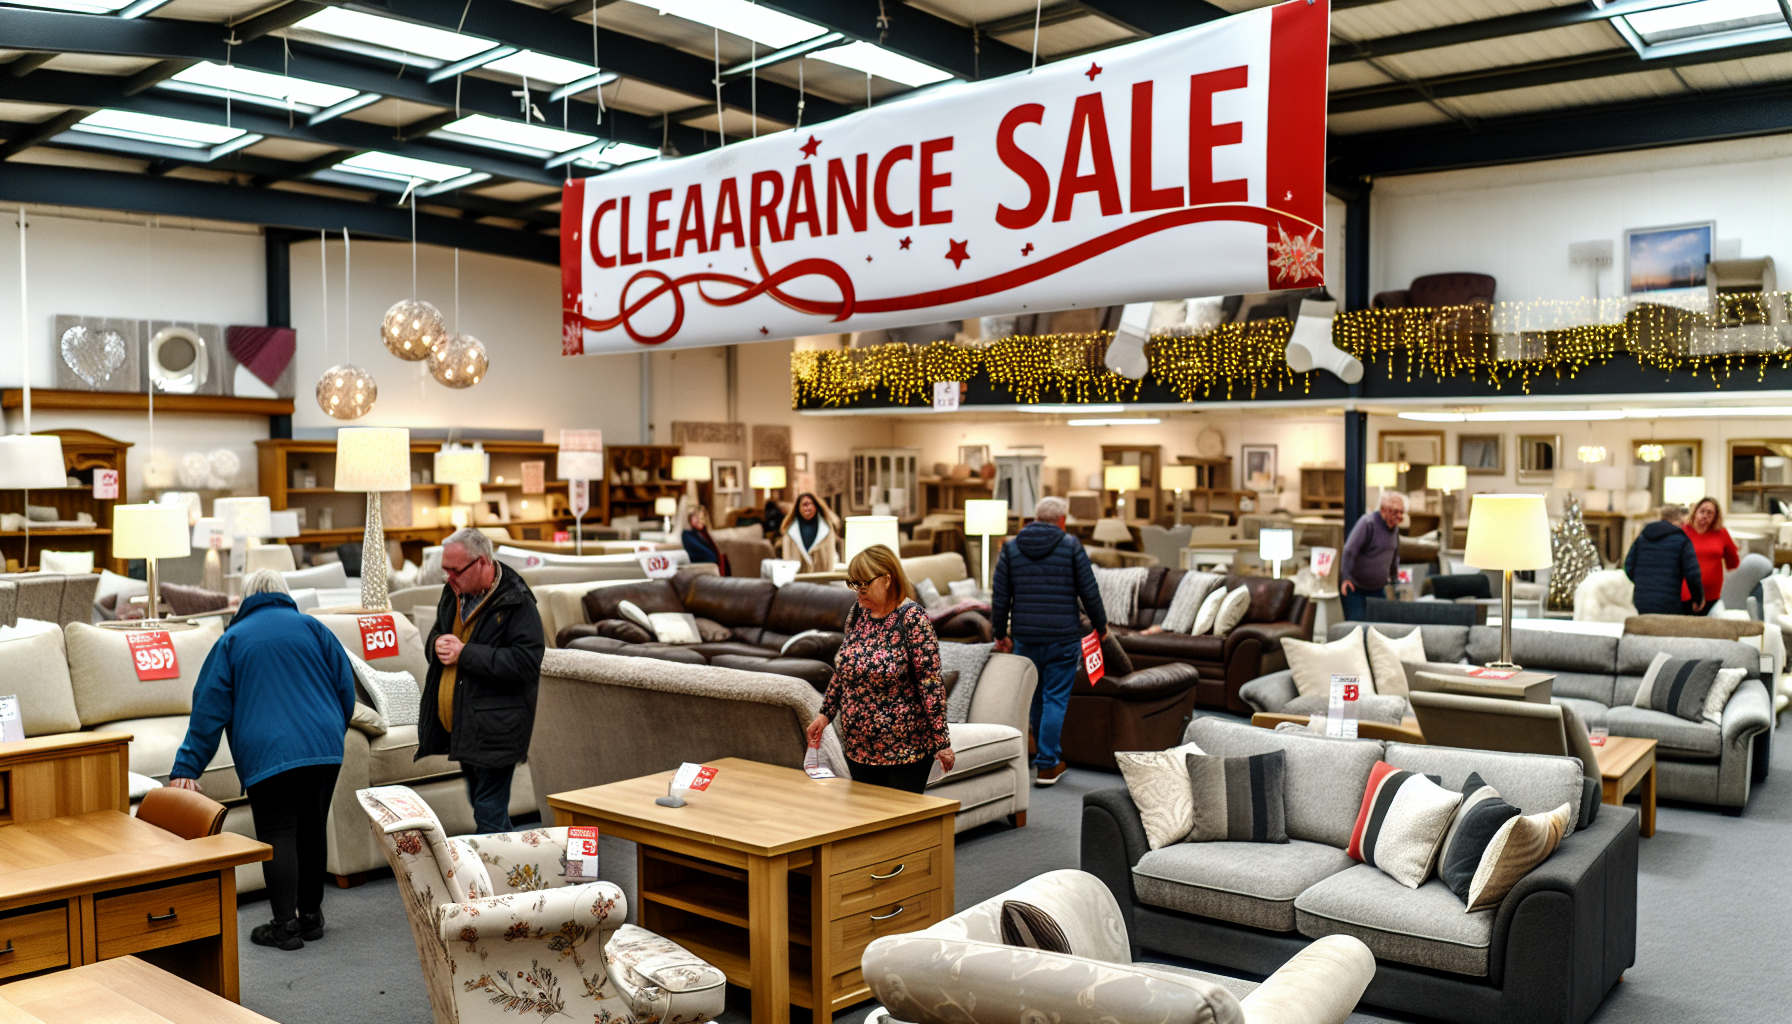 Holiday furniture clearance event